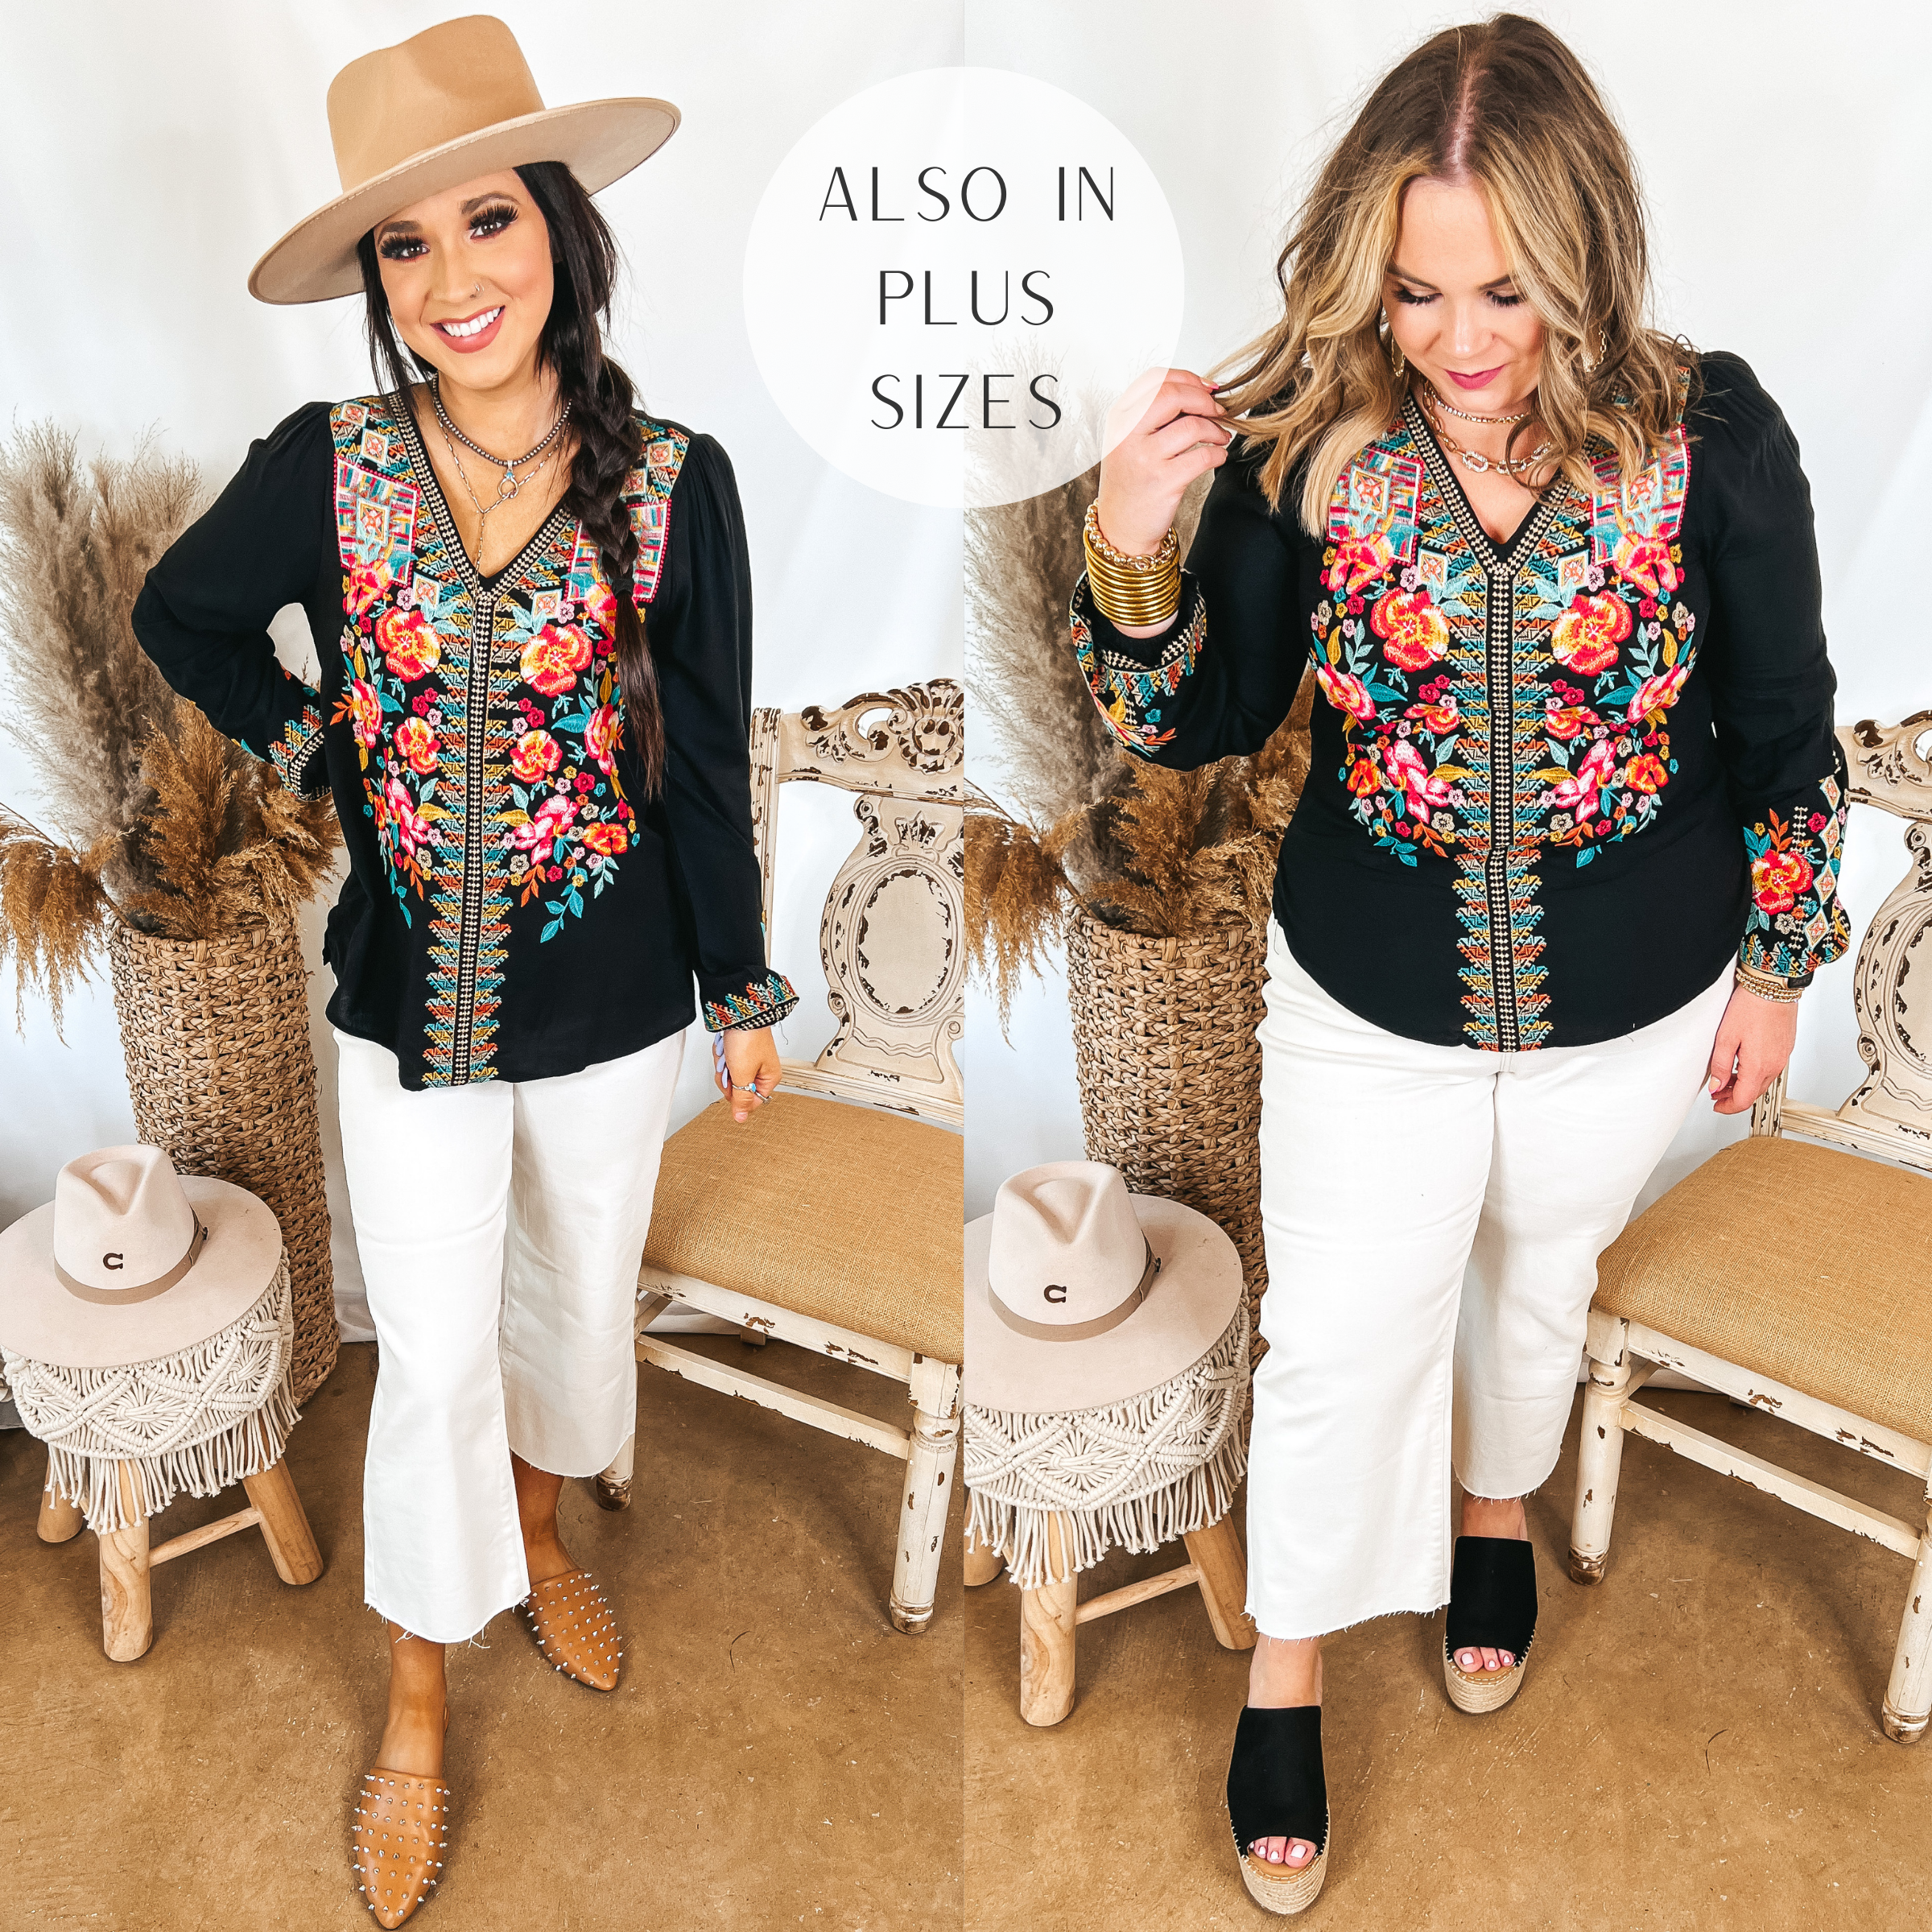 Models are wearing a black long sleeve top with embroidery on the front. Both models have it paired with white cropped jeans. Size small model has it paired with tan mules and a tan hat. SIze large model has it paired with black wedges and gold jewelry.